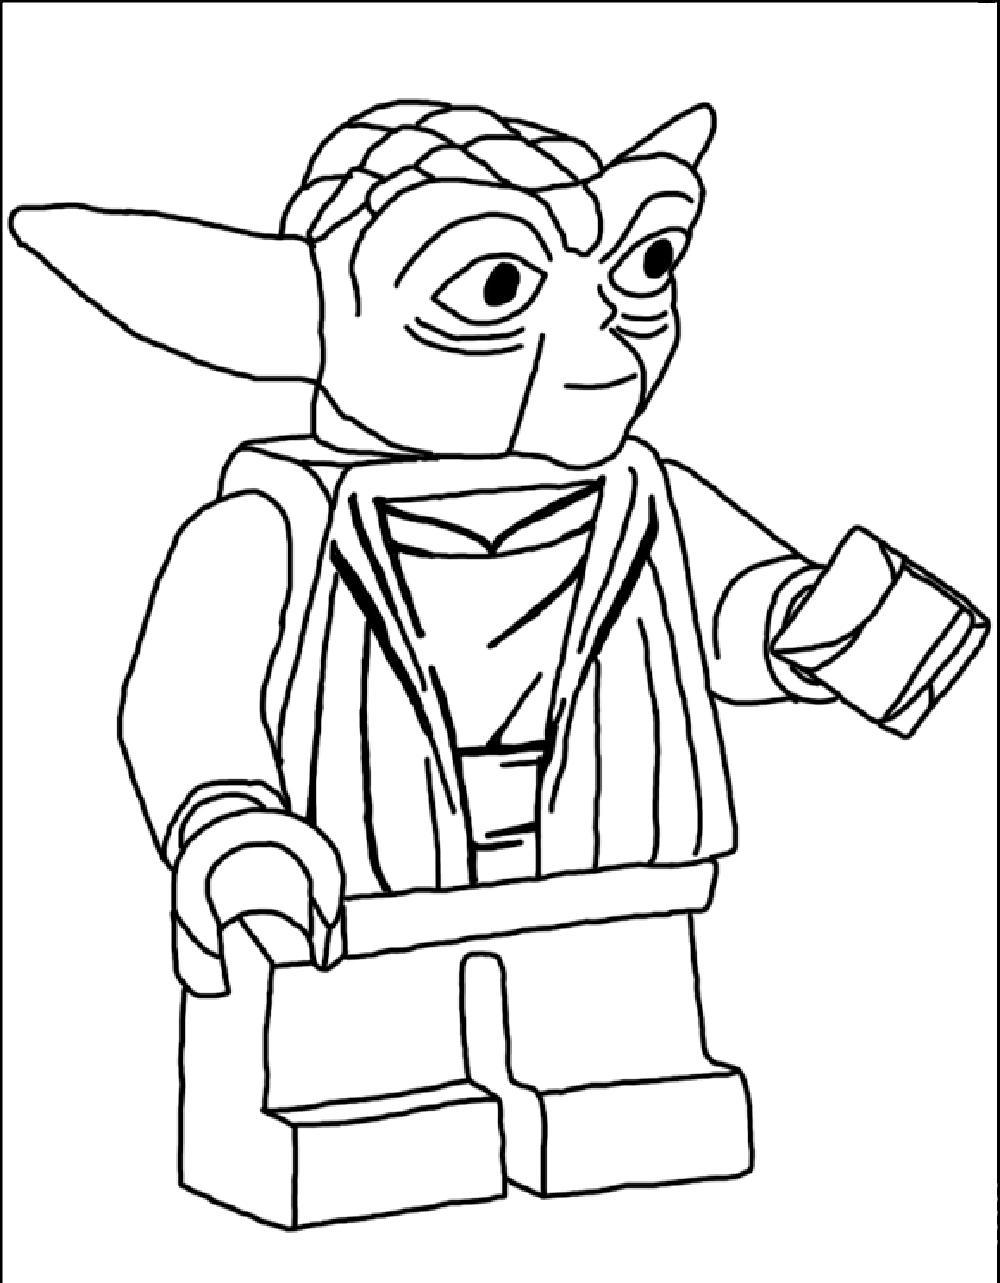 Create Your Own Lego Coloring Pages for Kids